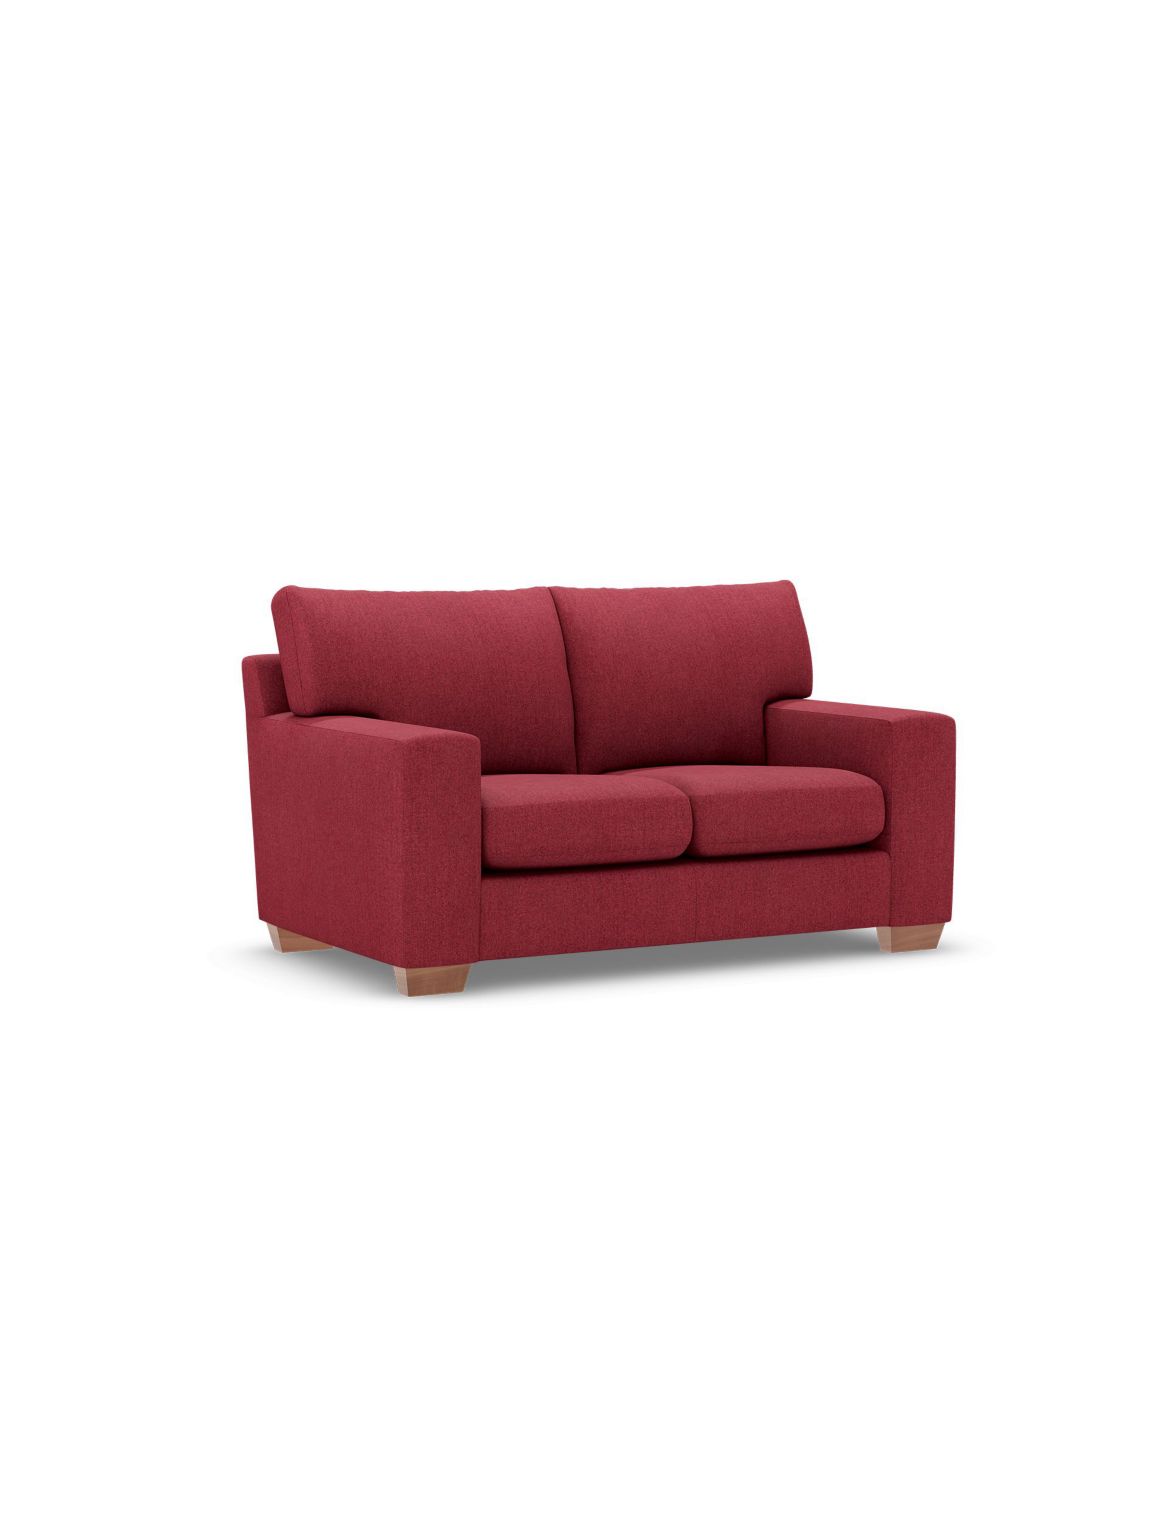 Alfie Compact Sofa red